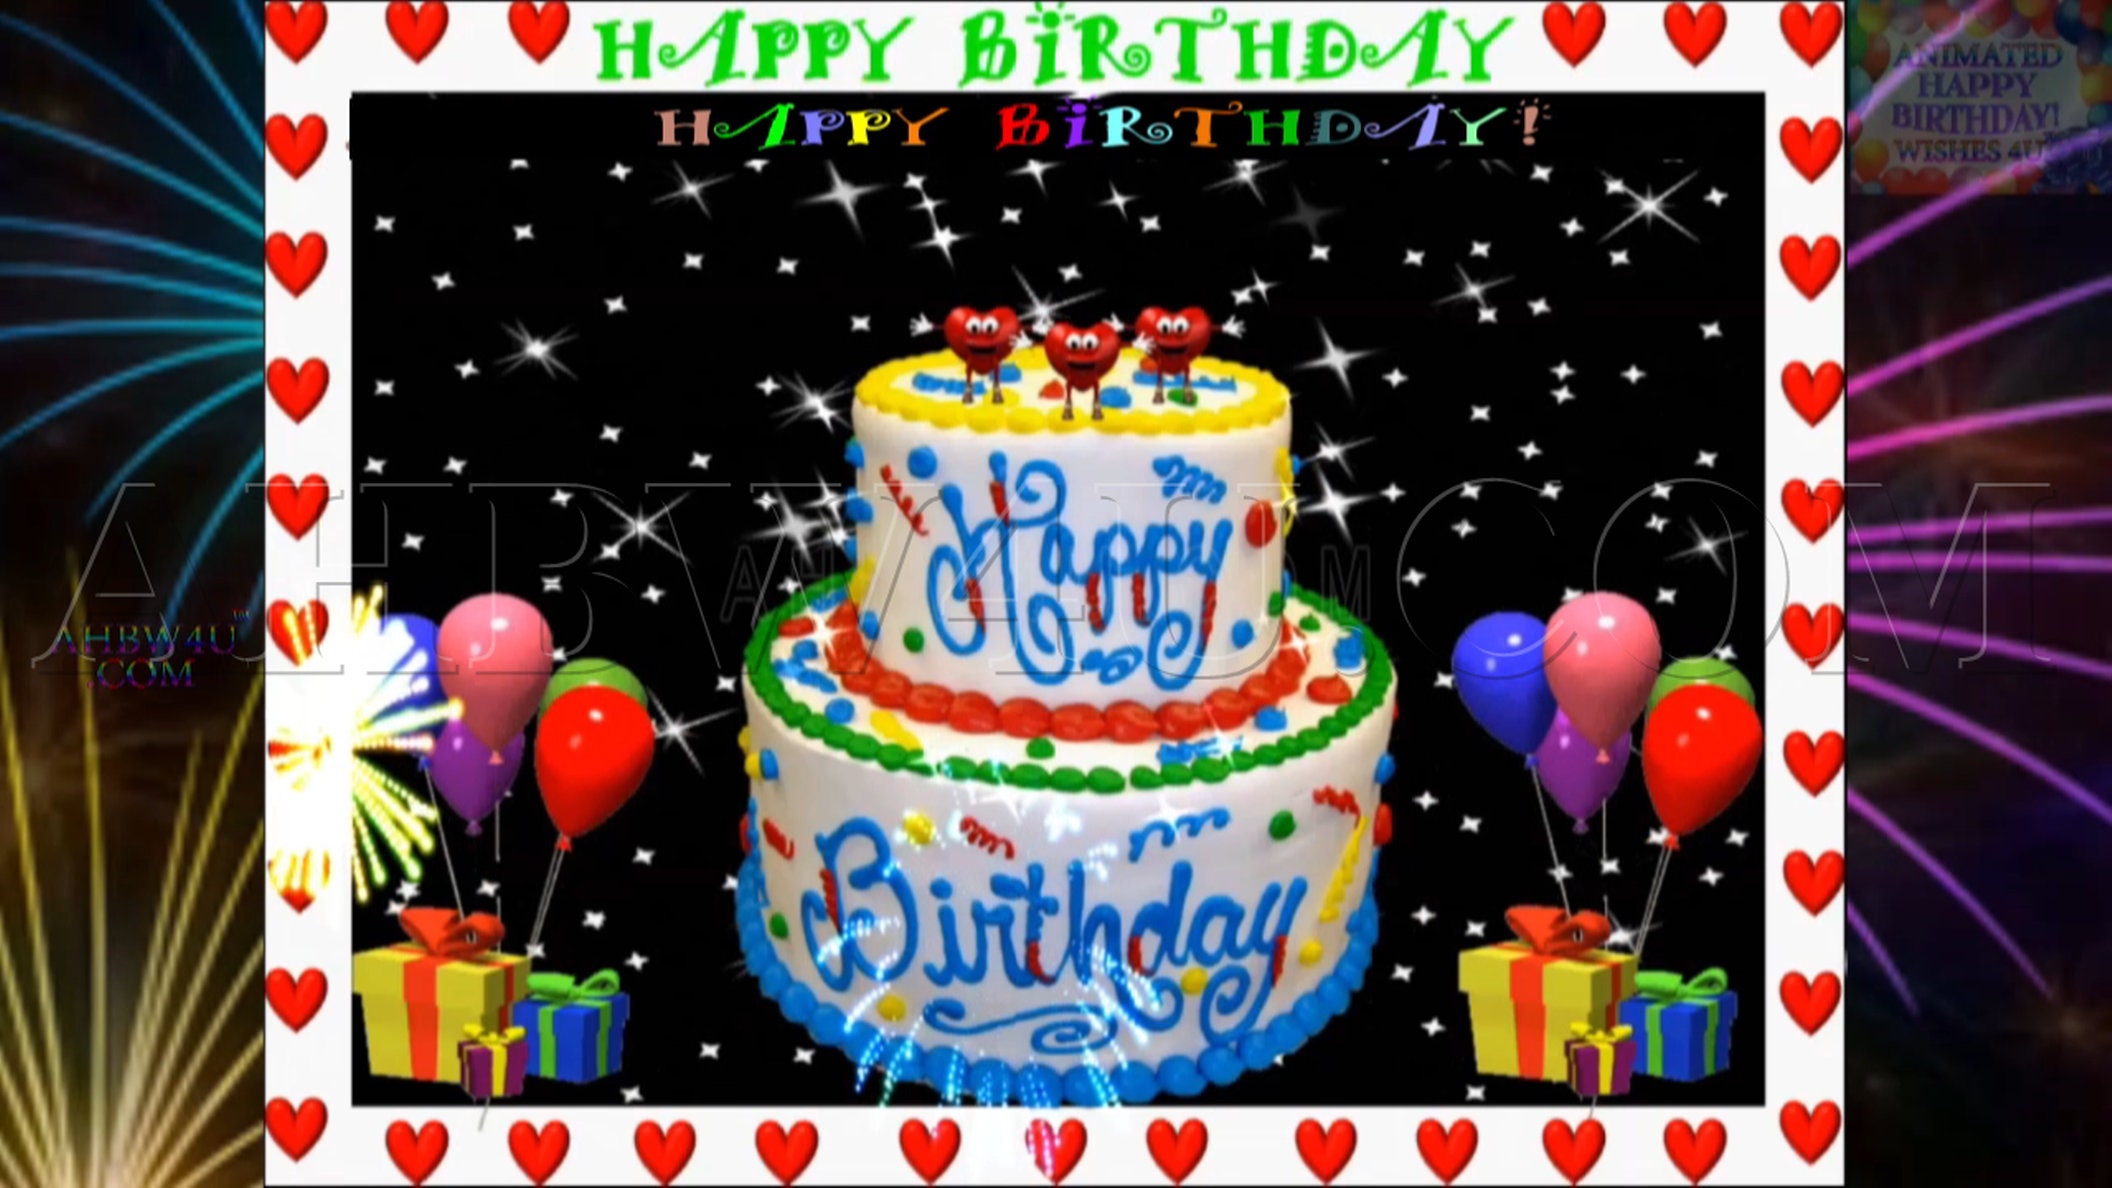 Happy Birthday Tower Cake Gifs 196 & 21 Buy 1 and Get 1 FREE - Etsy New  Zealand